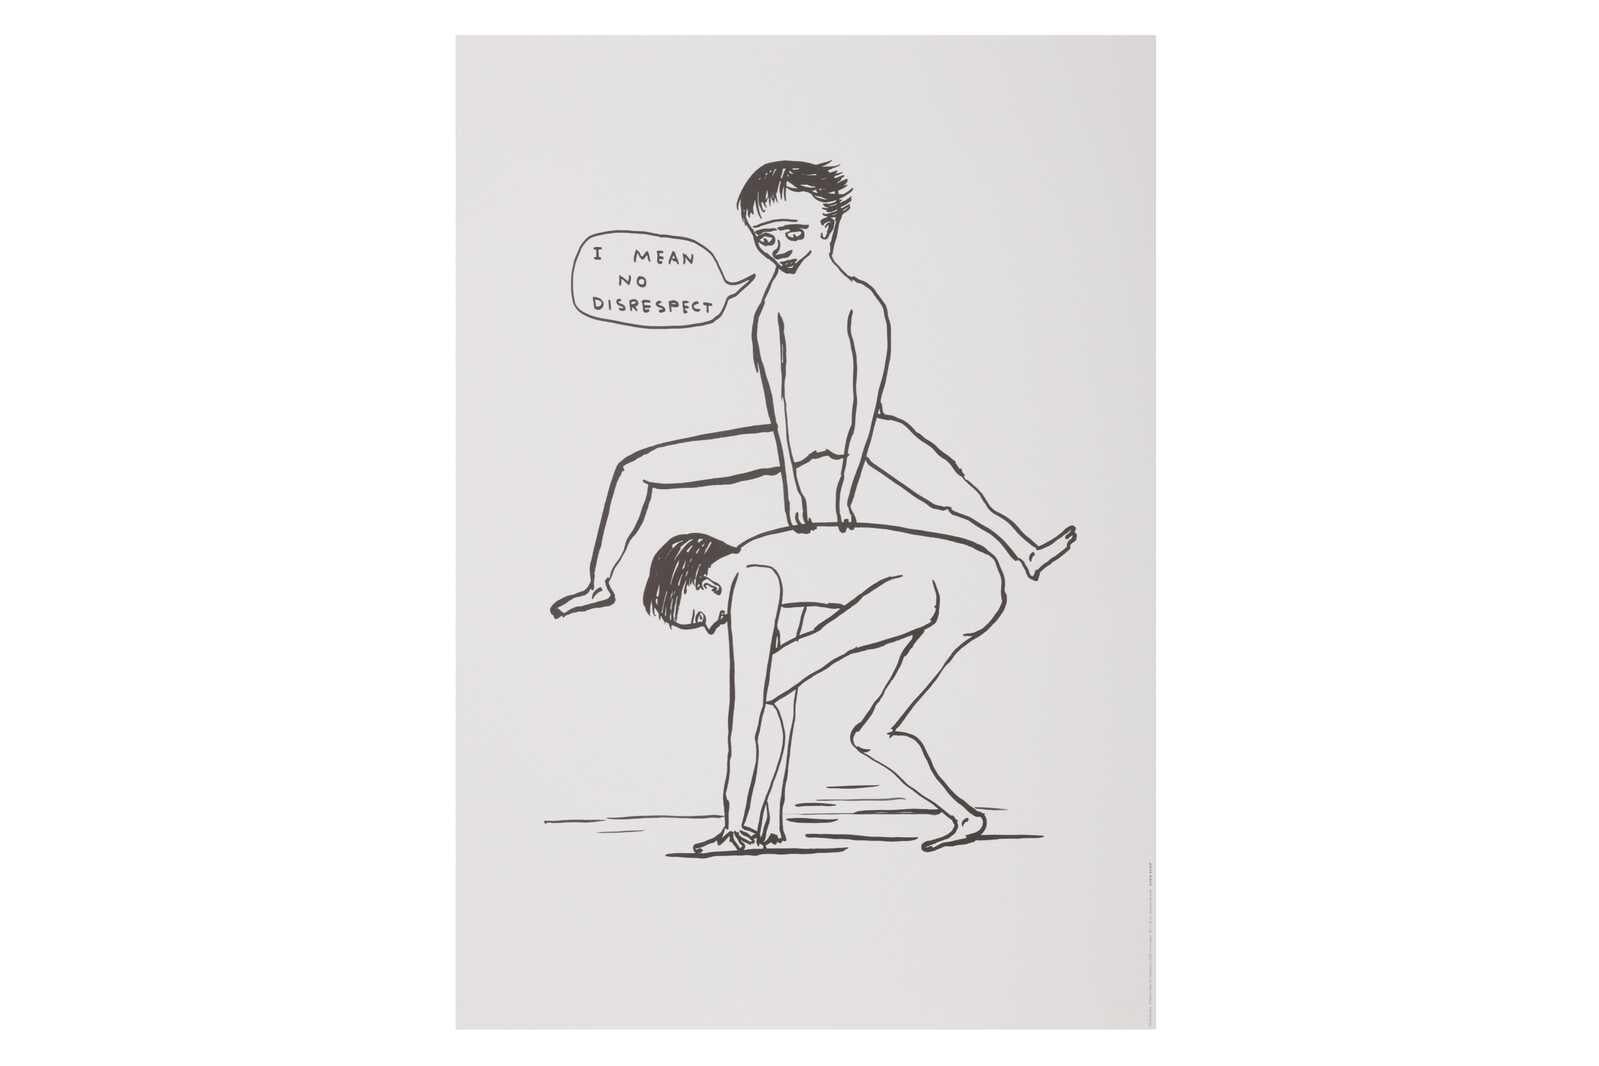 Human Behaviour and Animals and Existentialism full set of 8 prints - Contemporary Art by David Shrigley